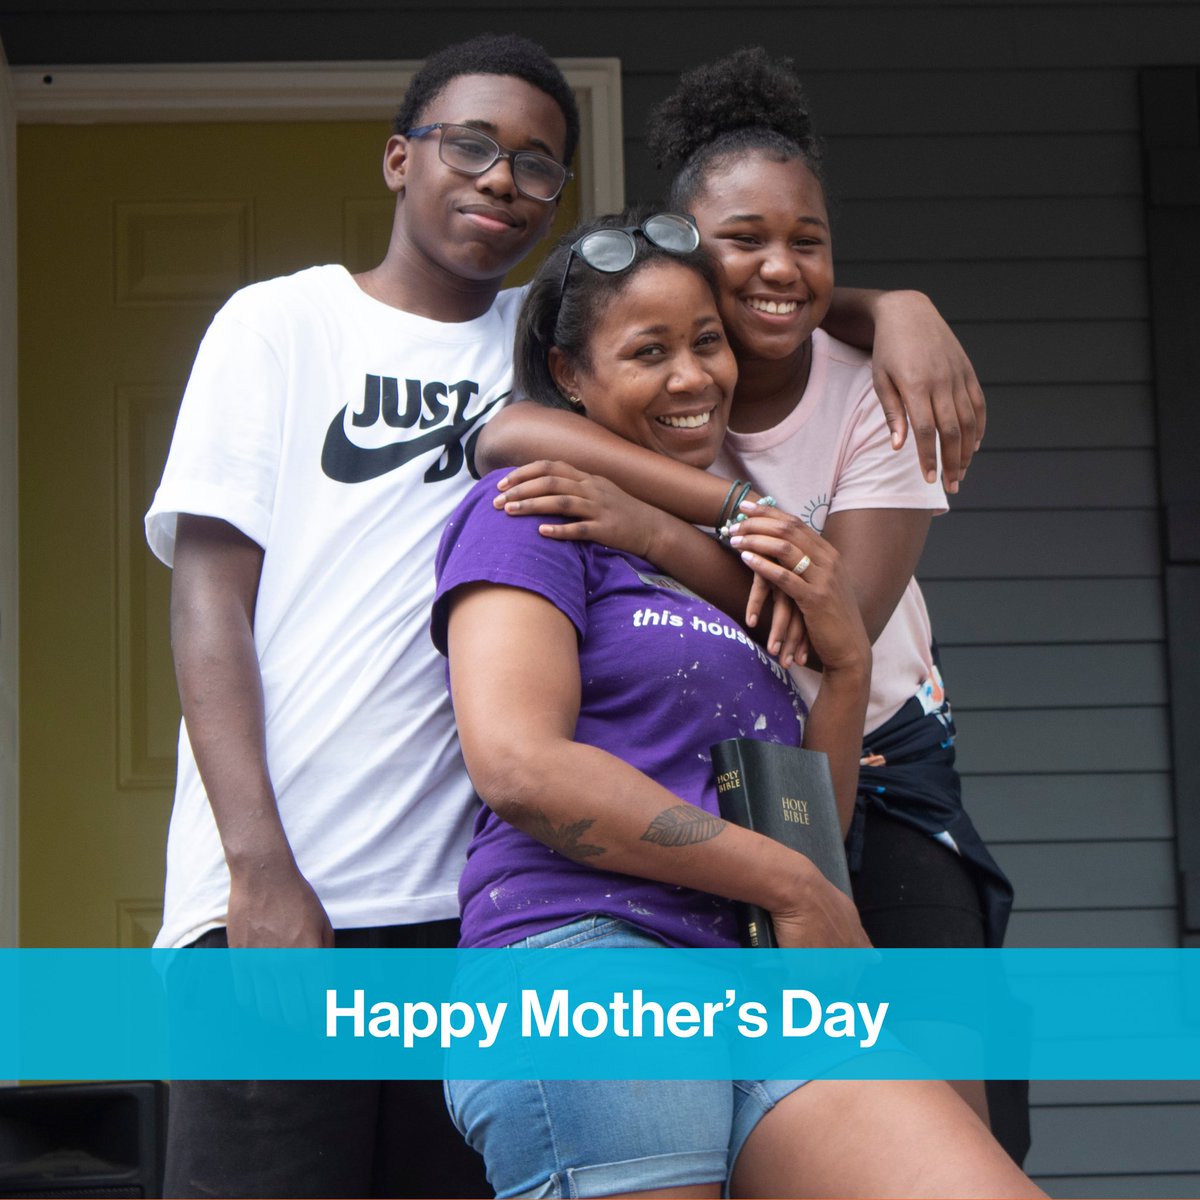 We hope everyone has a wonderful Mother’s Day today — including our many amazing Habitat #homeowners who are rockstar moms! #BuiltToThrive